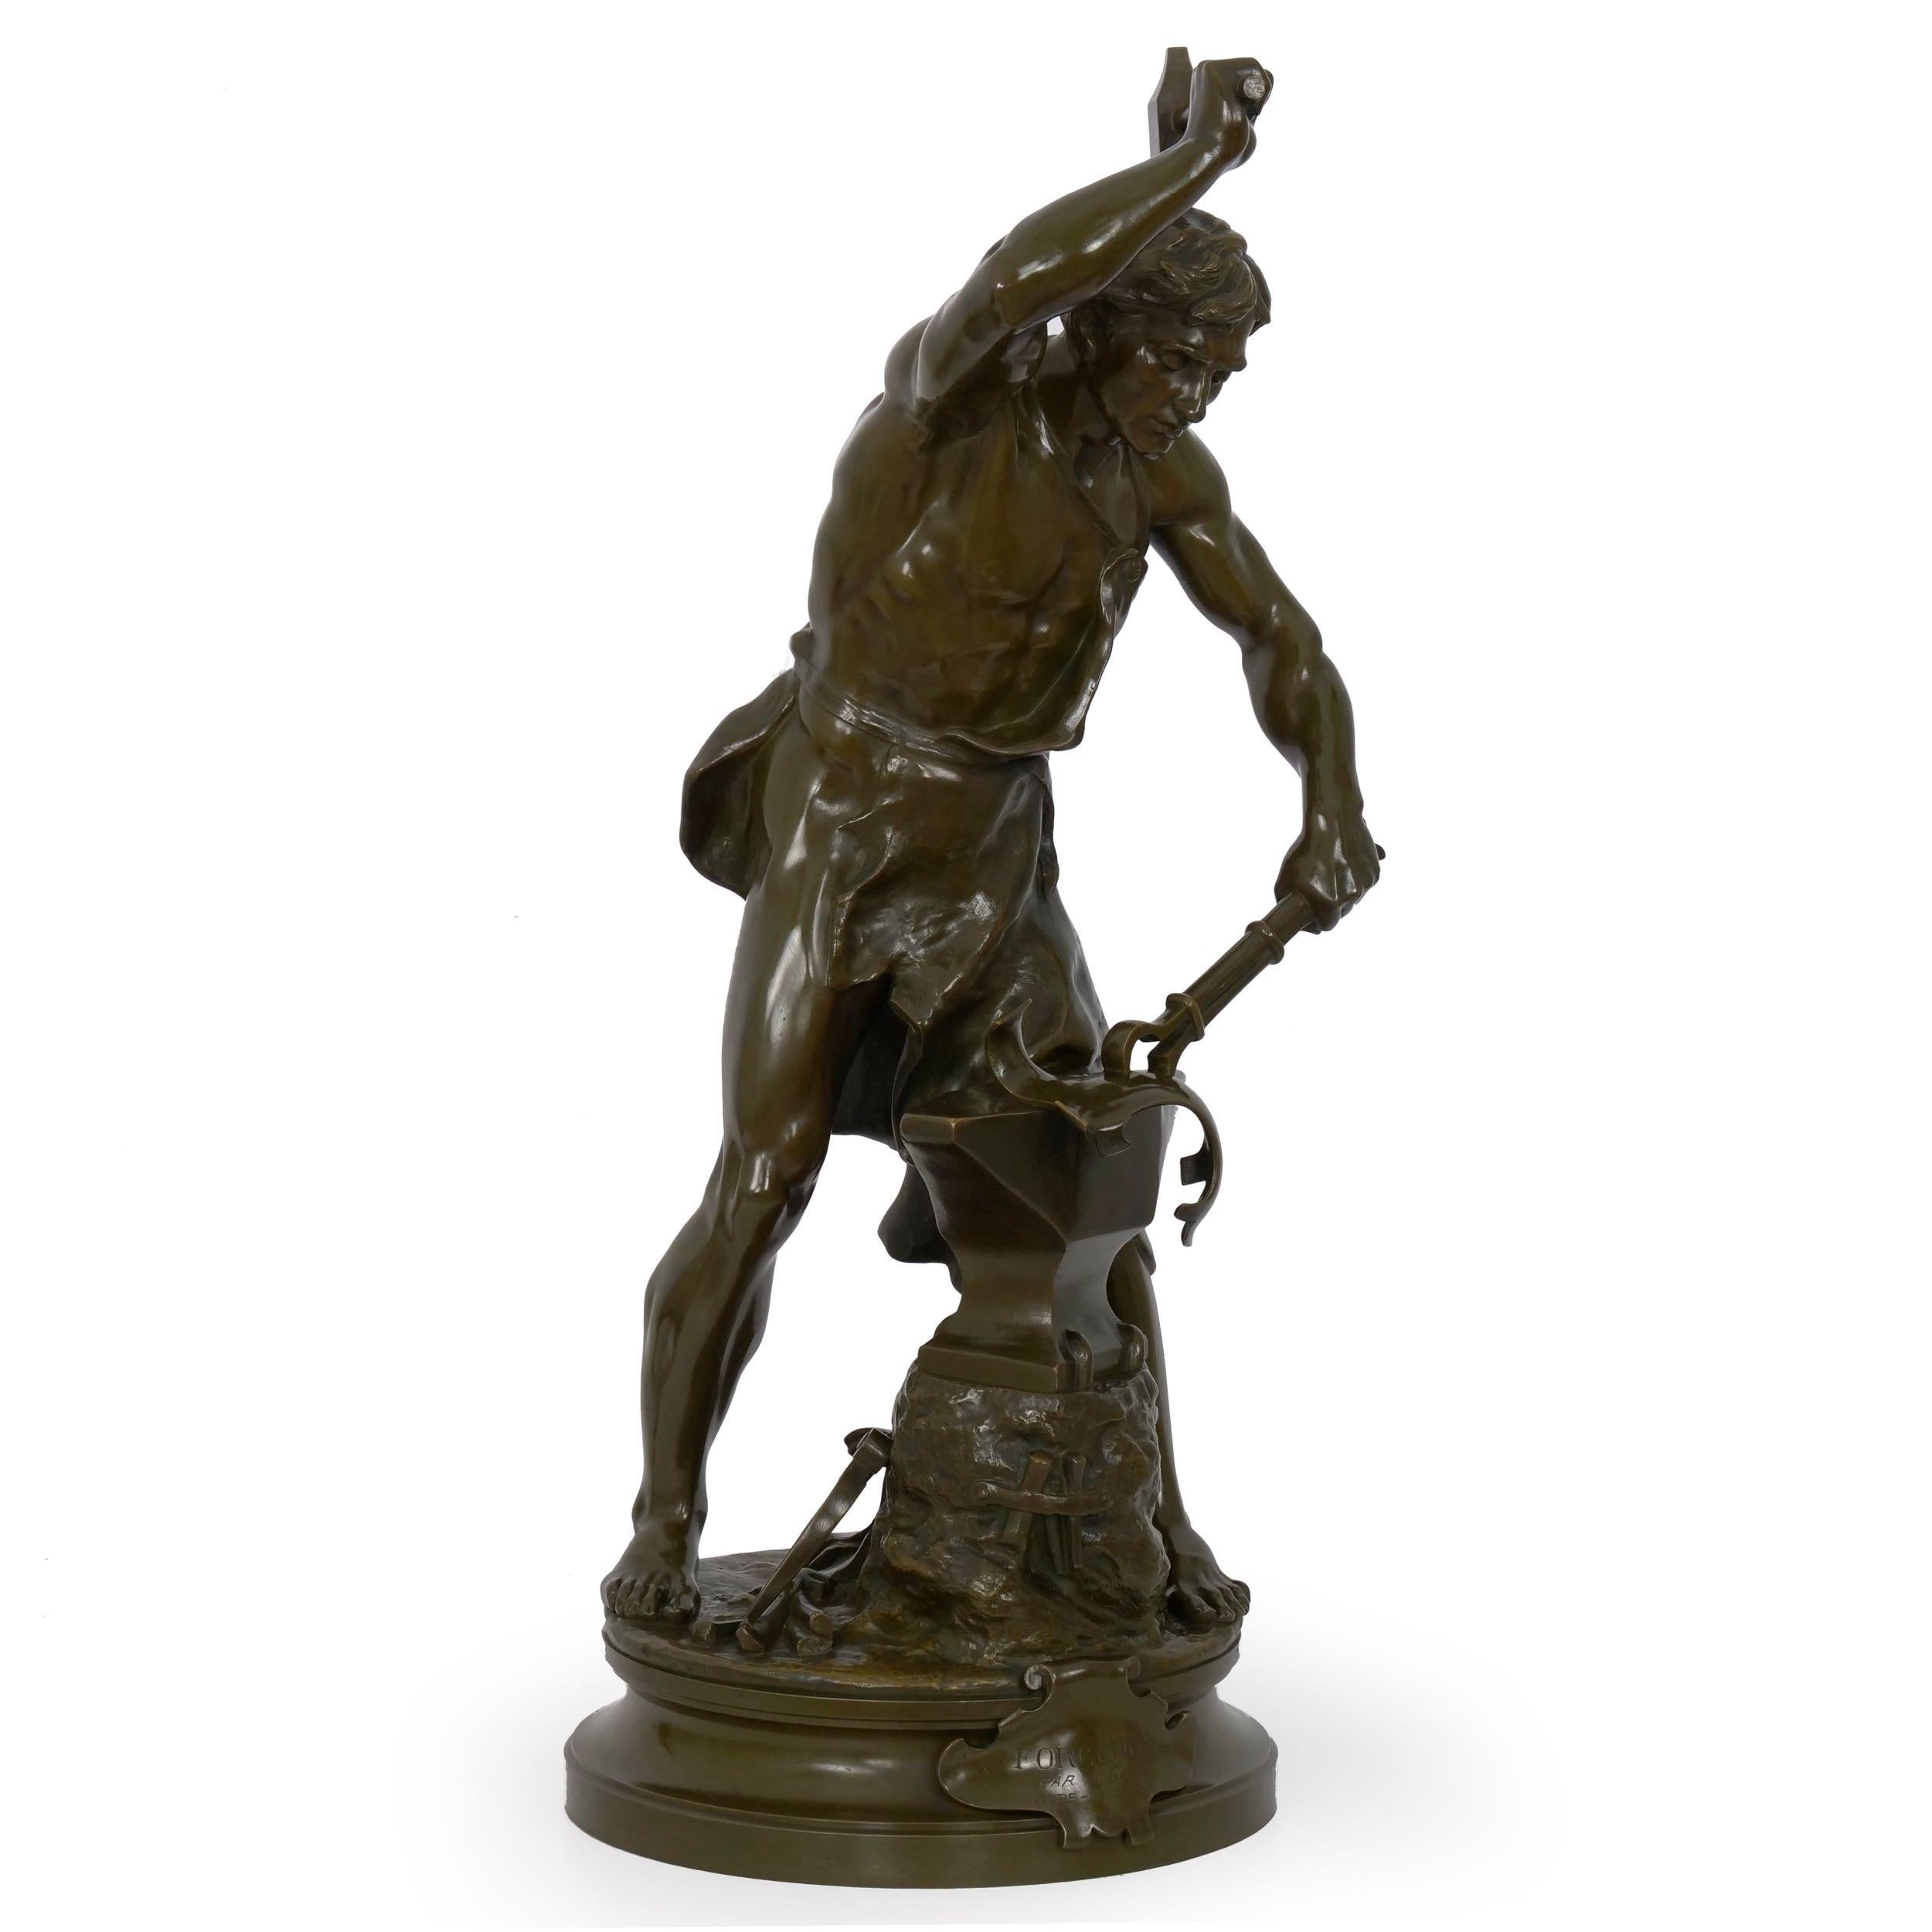 This is a Fine sculpture in bronze by Adrien Etienne Gaudez of a blacksmith laboring over his work, titled 